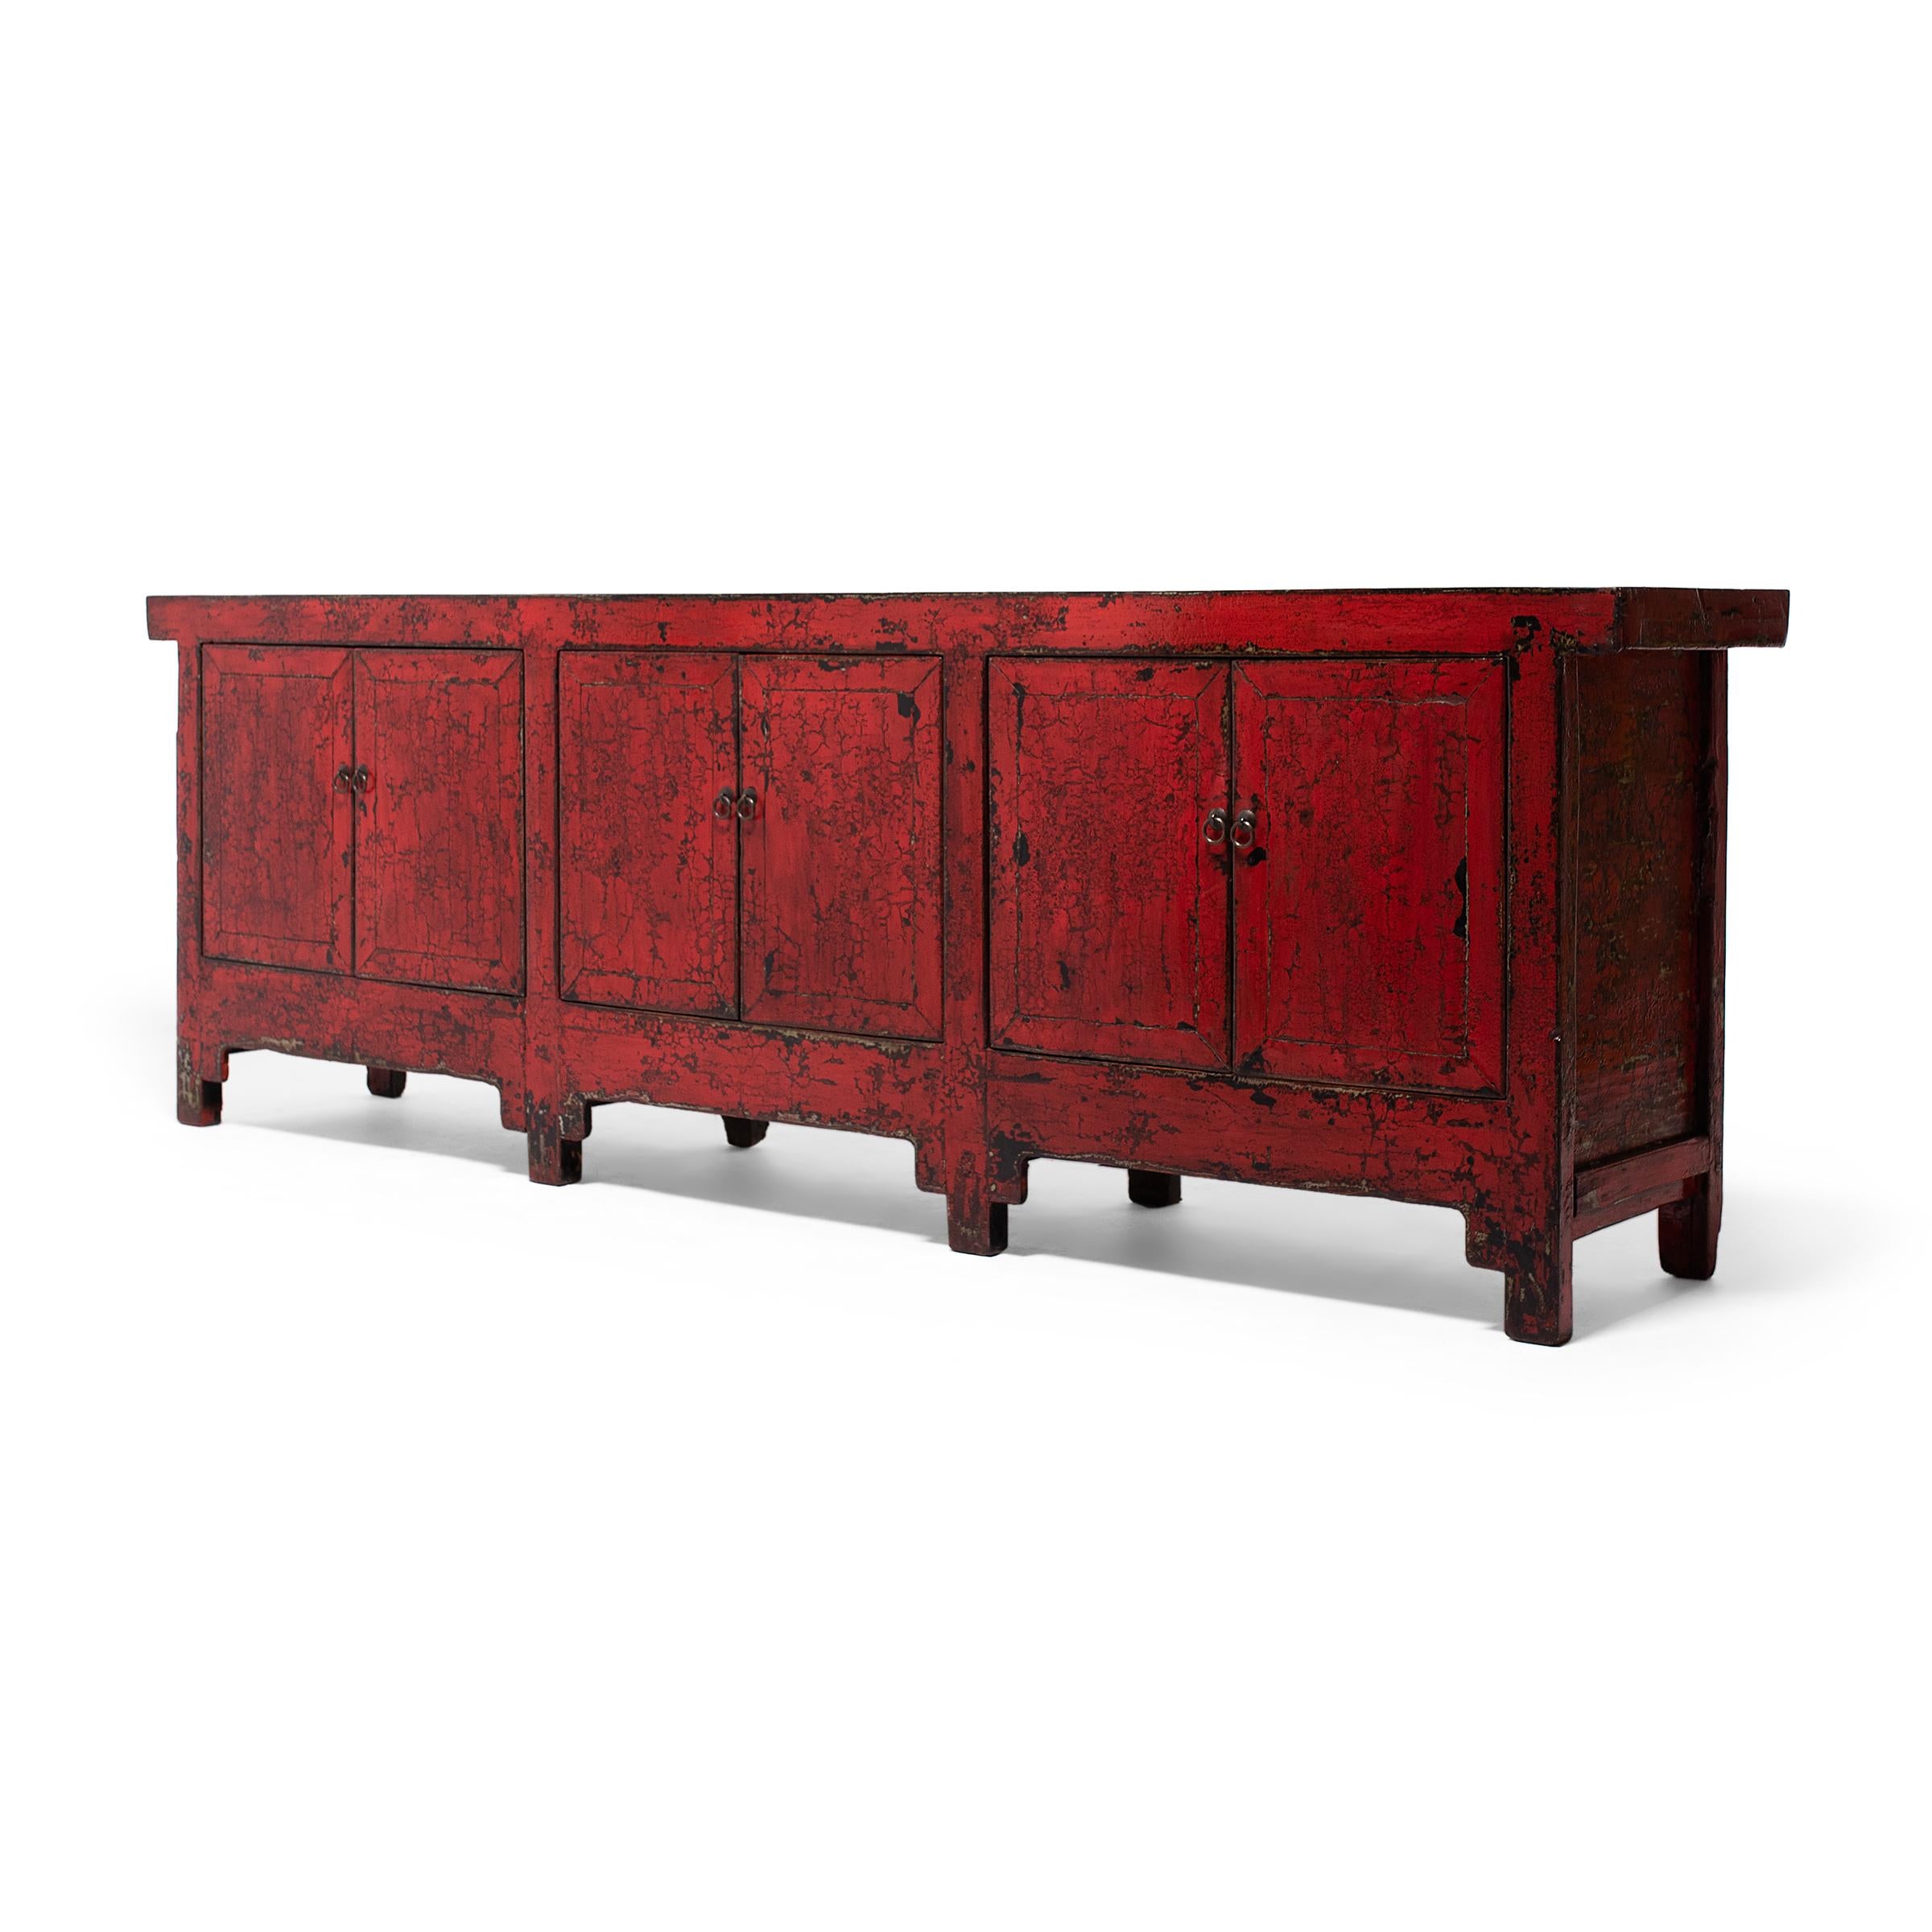 20th Century Chinese Red Lacquer Grasslands Coffer, c. 1900